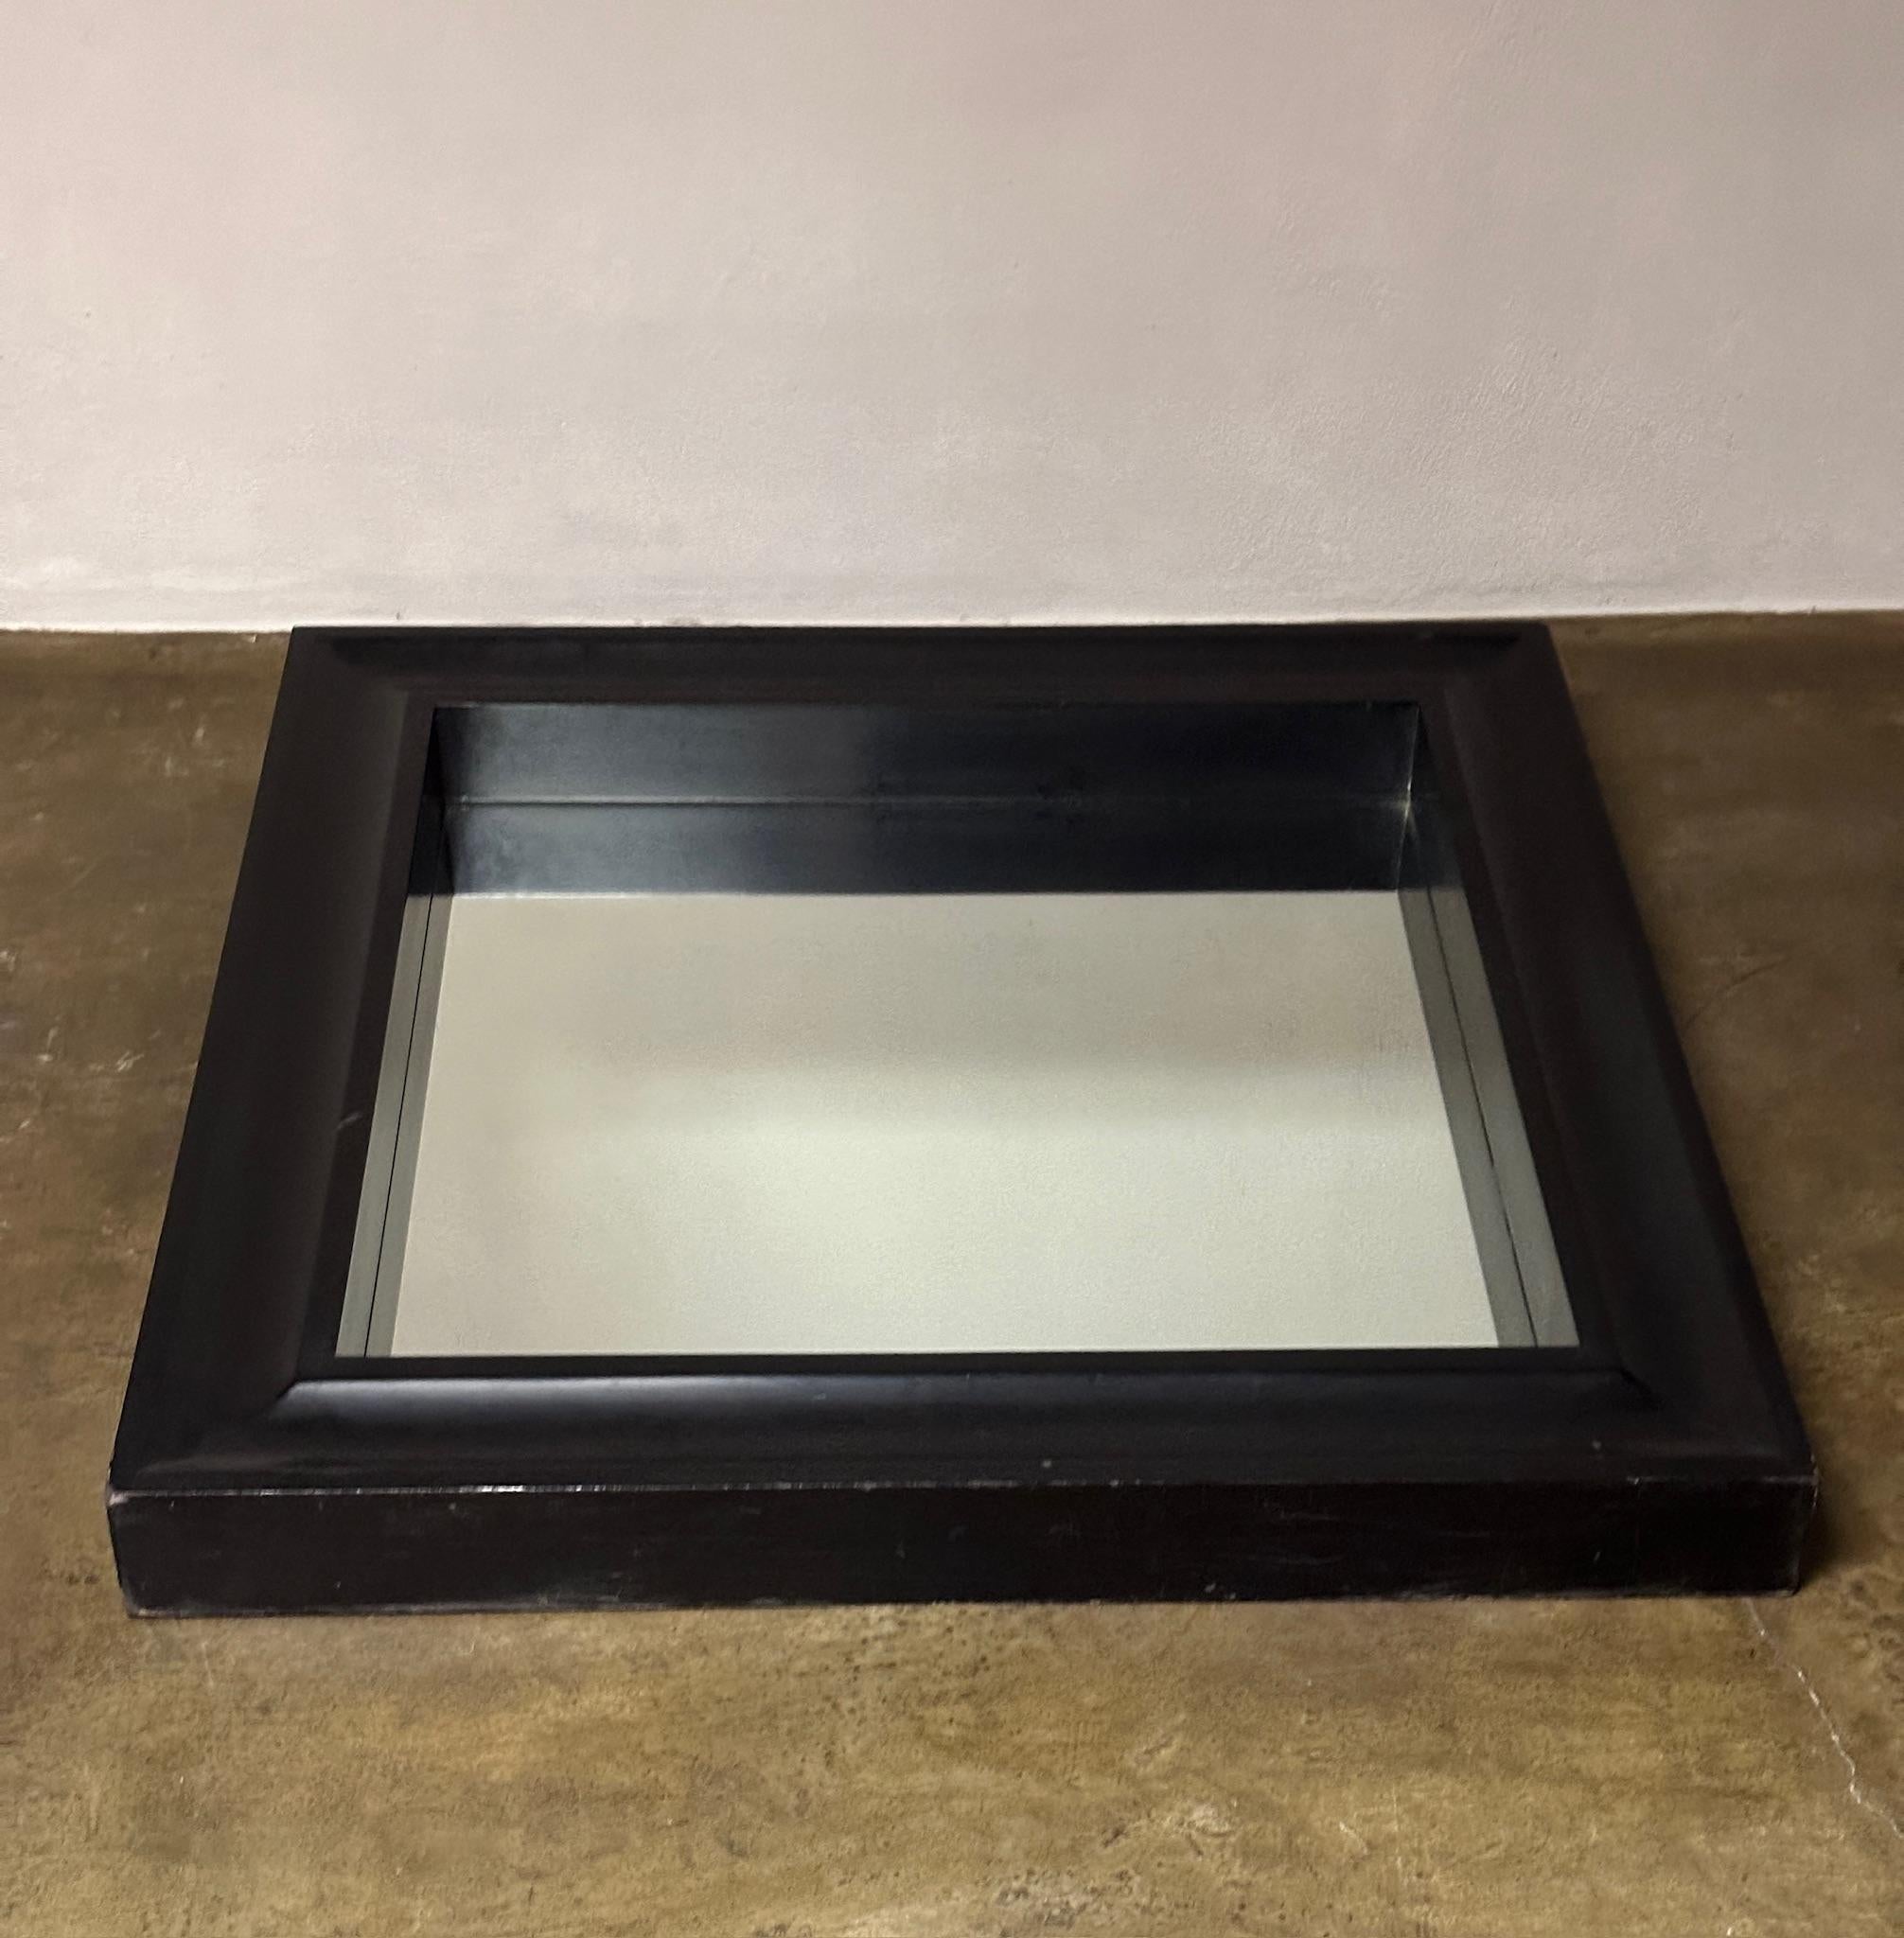 A mid-century mirror with a gutsy square black frame. Perfect for a powder room or small entry space, this timeless piece has an understated, elegant appeal. 

France, circa 1940

Dimensions: 39w x 39H x 4D